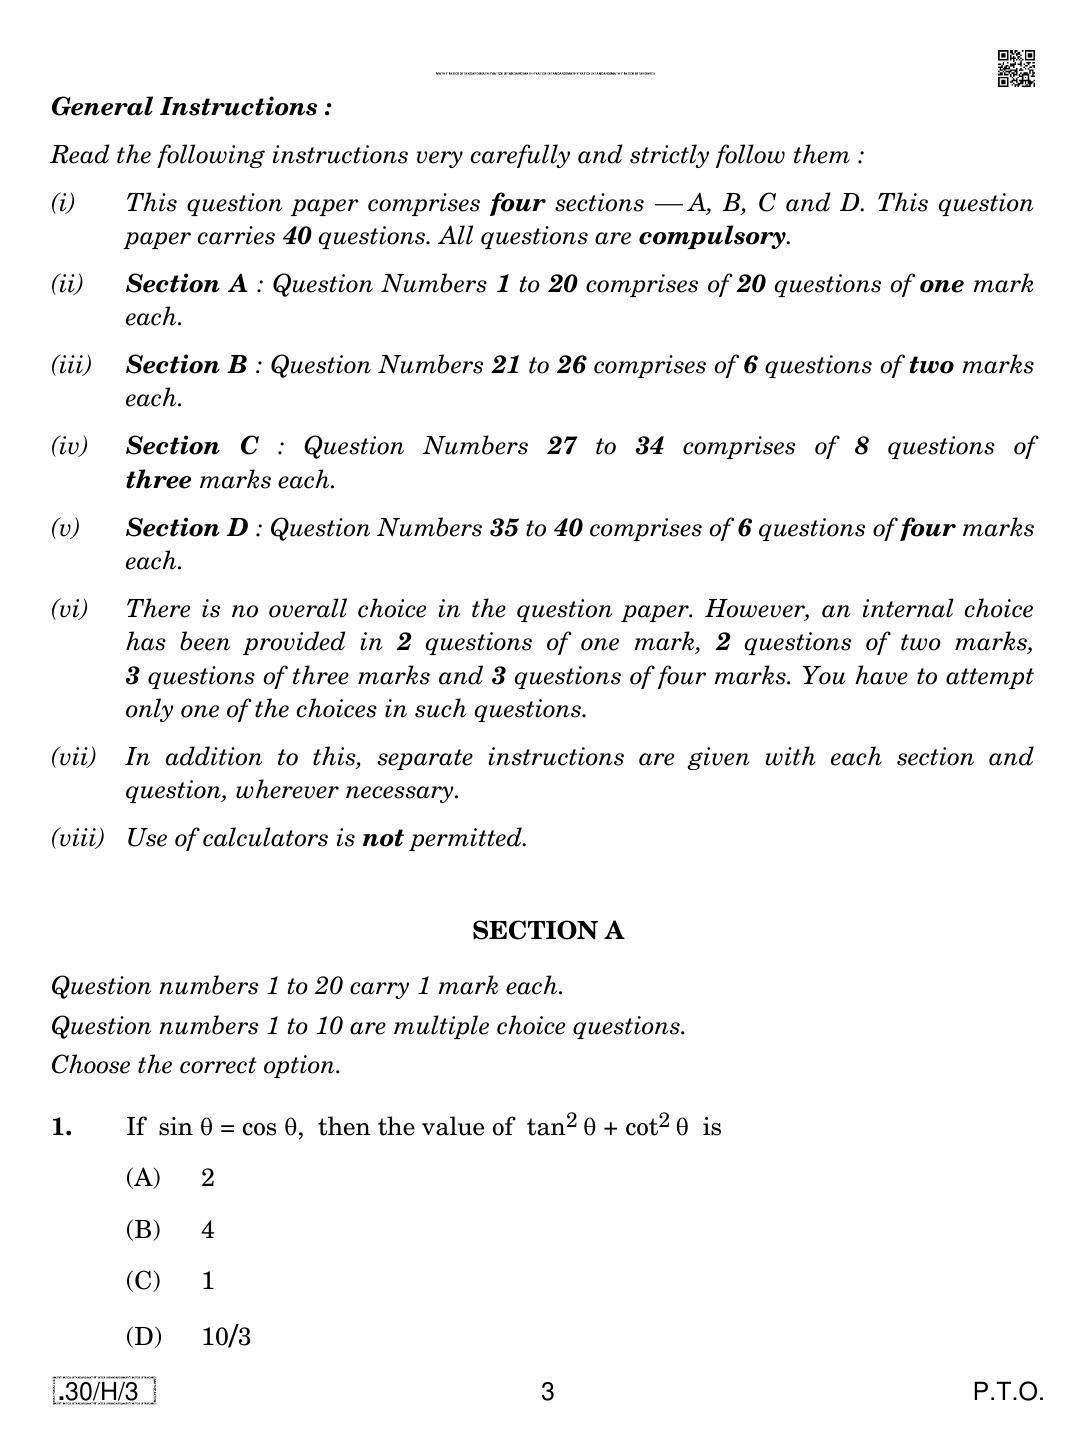 CBSE Class 10 30-C-3 - Maths (Standard) 2020 Compartment Question Paper - Page 3